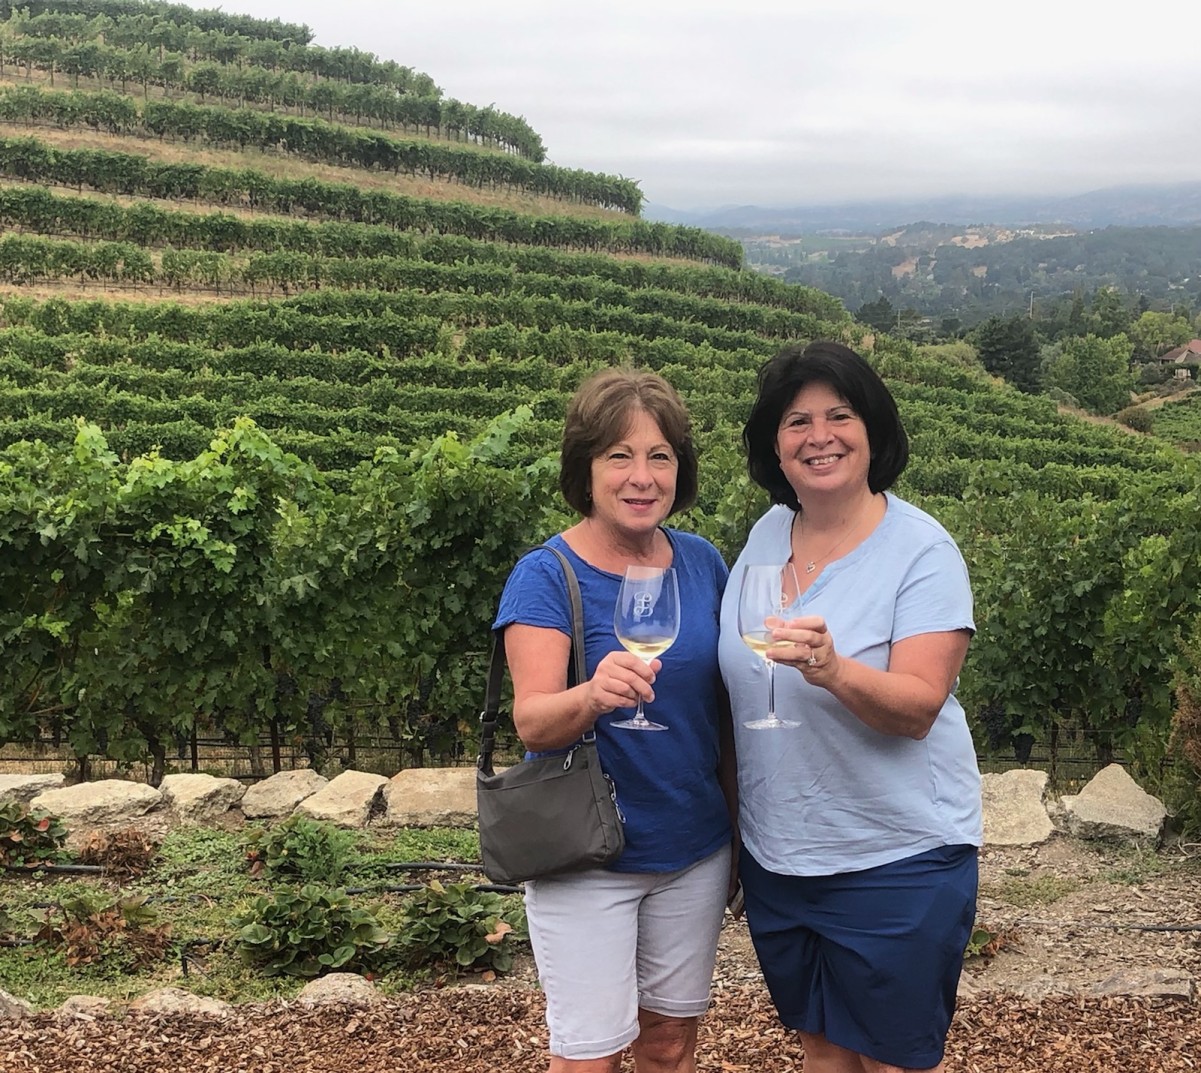 Pat DePietto and her sister wine tasting